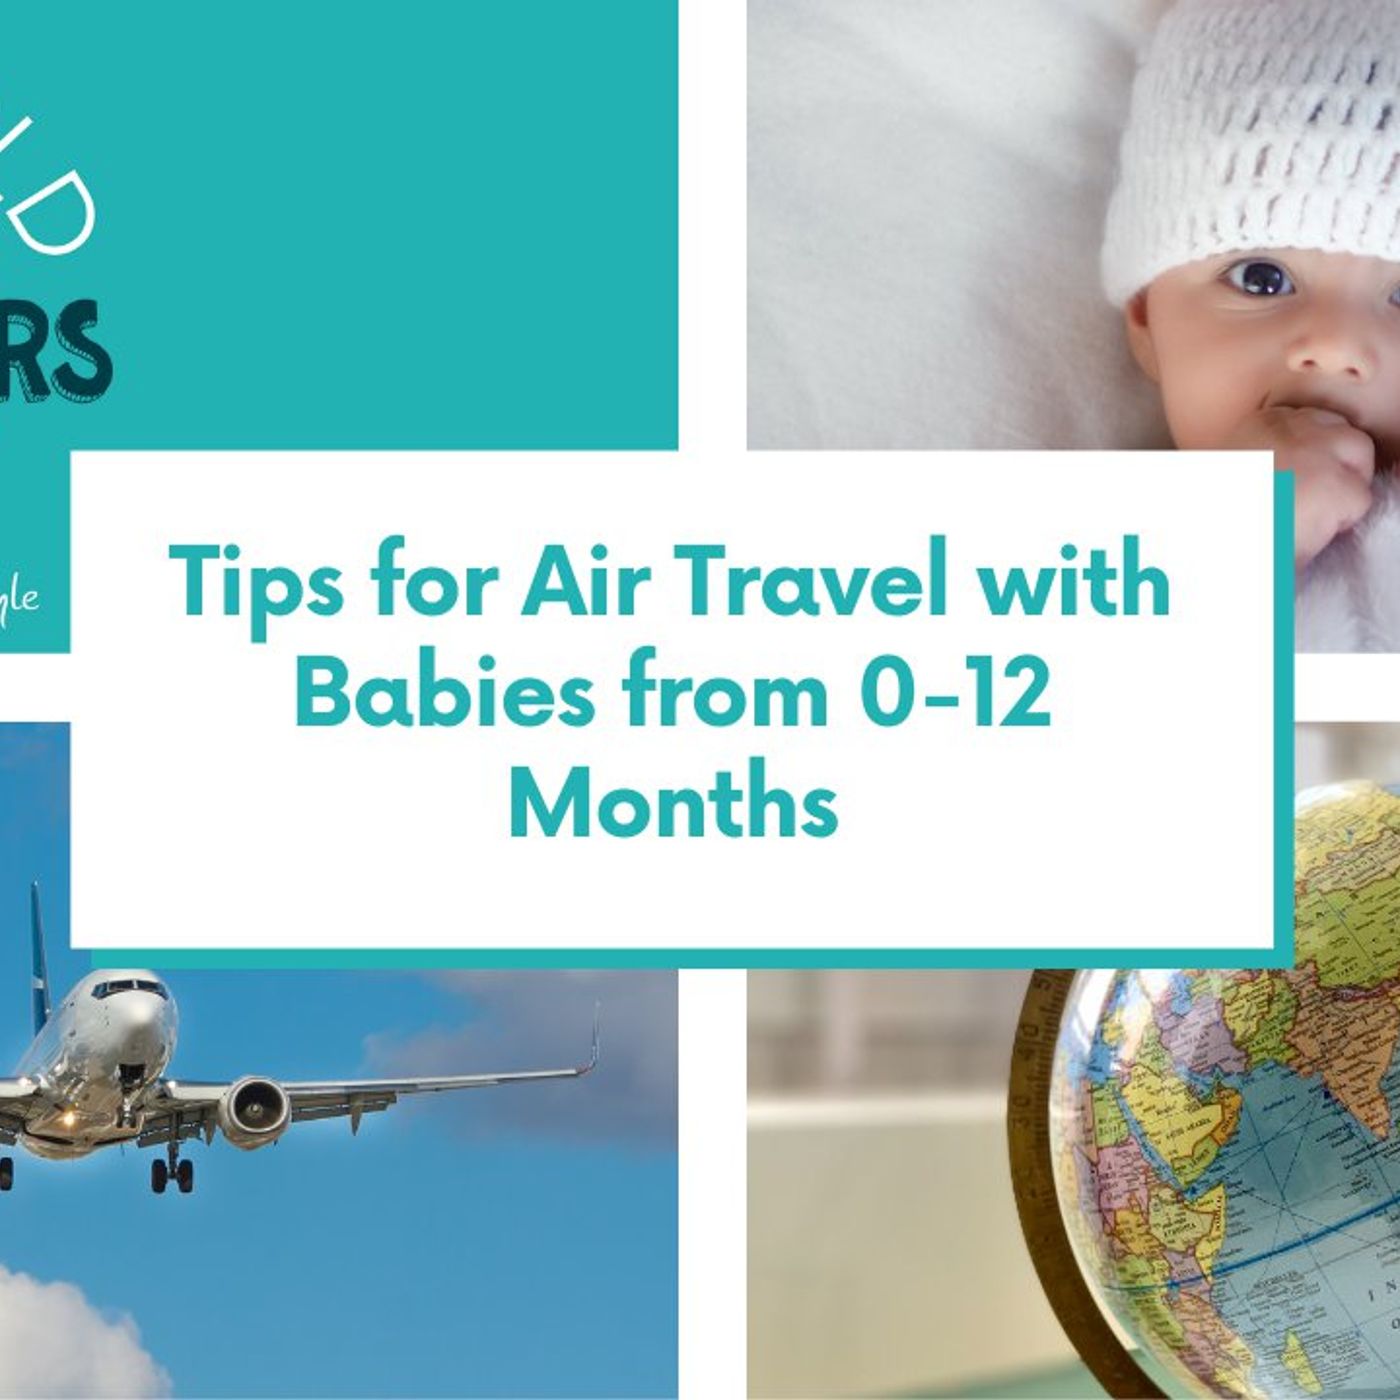 Tips for Air Travel with Babies from 0-12 Months